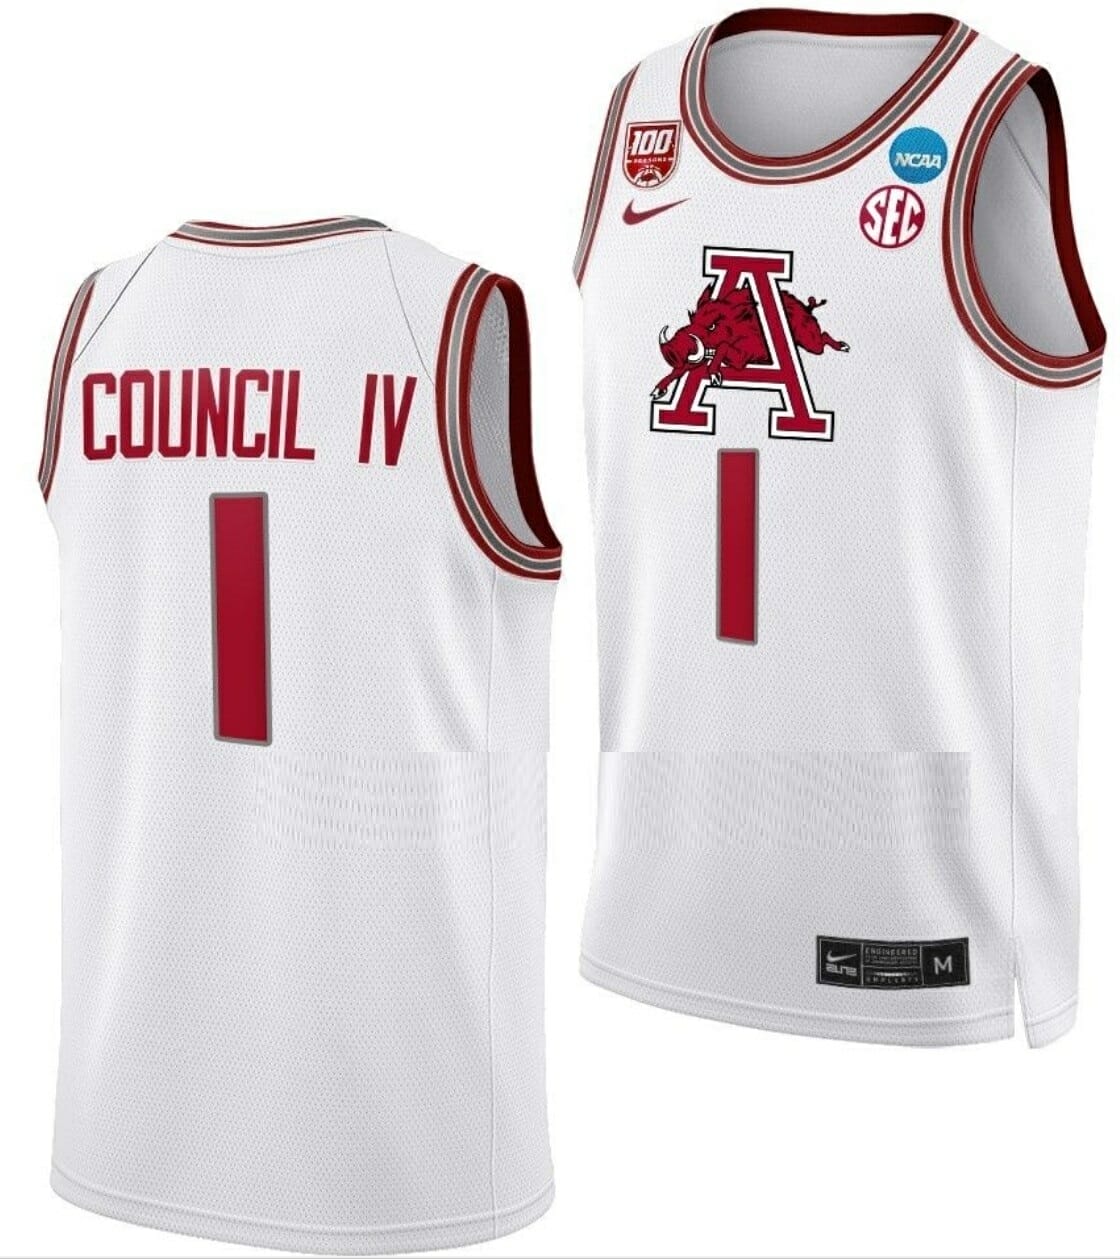 Nike AUTHENTIC Basketball Jersey - White #1